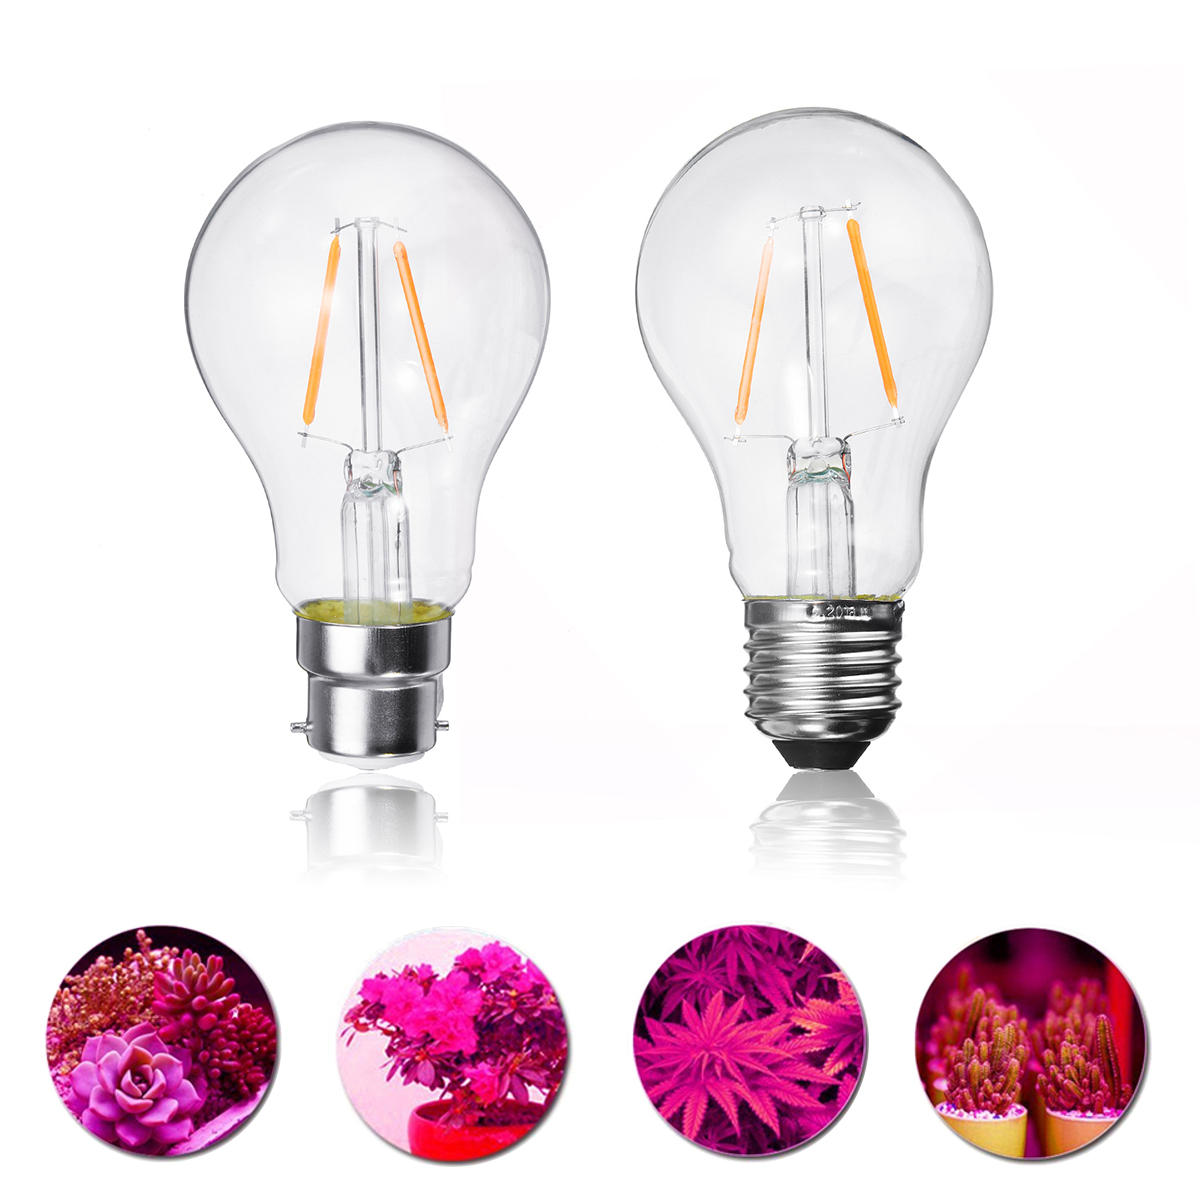 2W E27 B22 A60 LED Plant Grow Light Bulb for Hydroponics Greenhouse Non-Dimmable AC85-265V